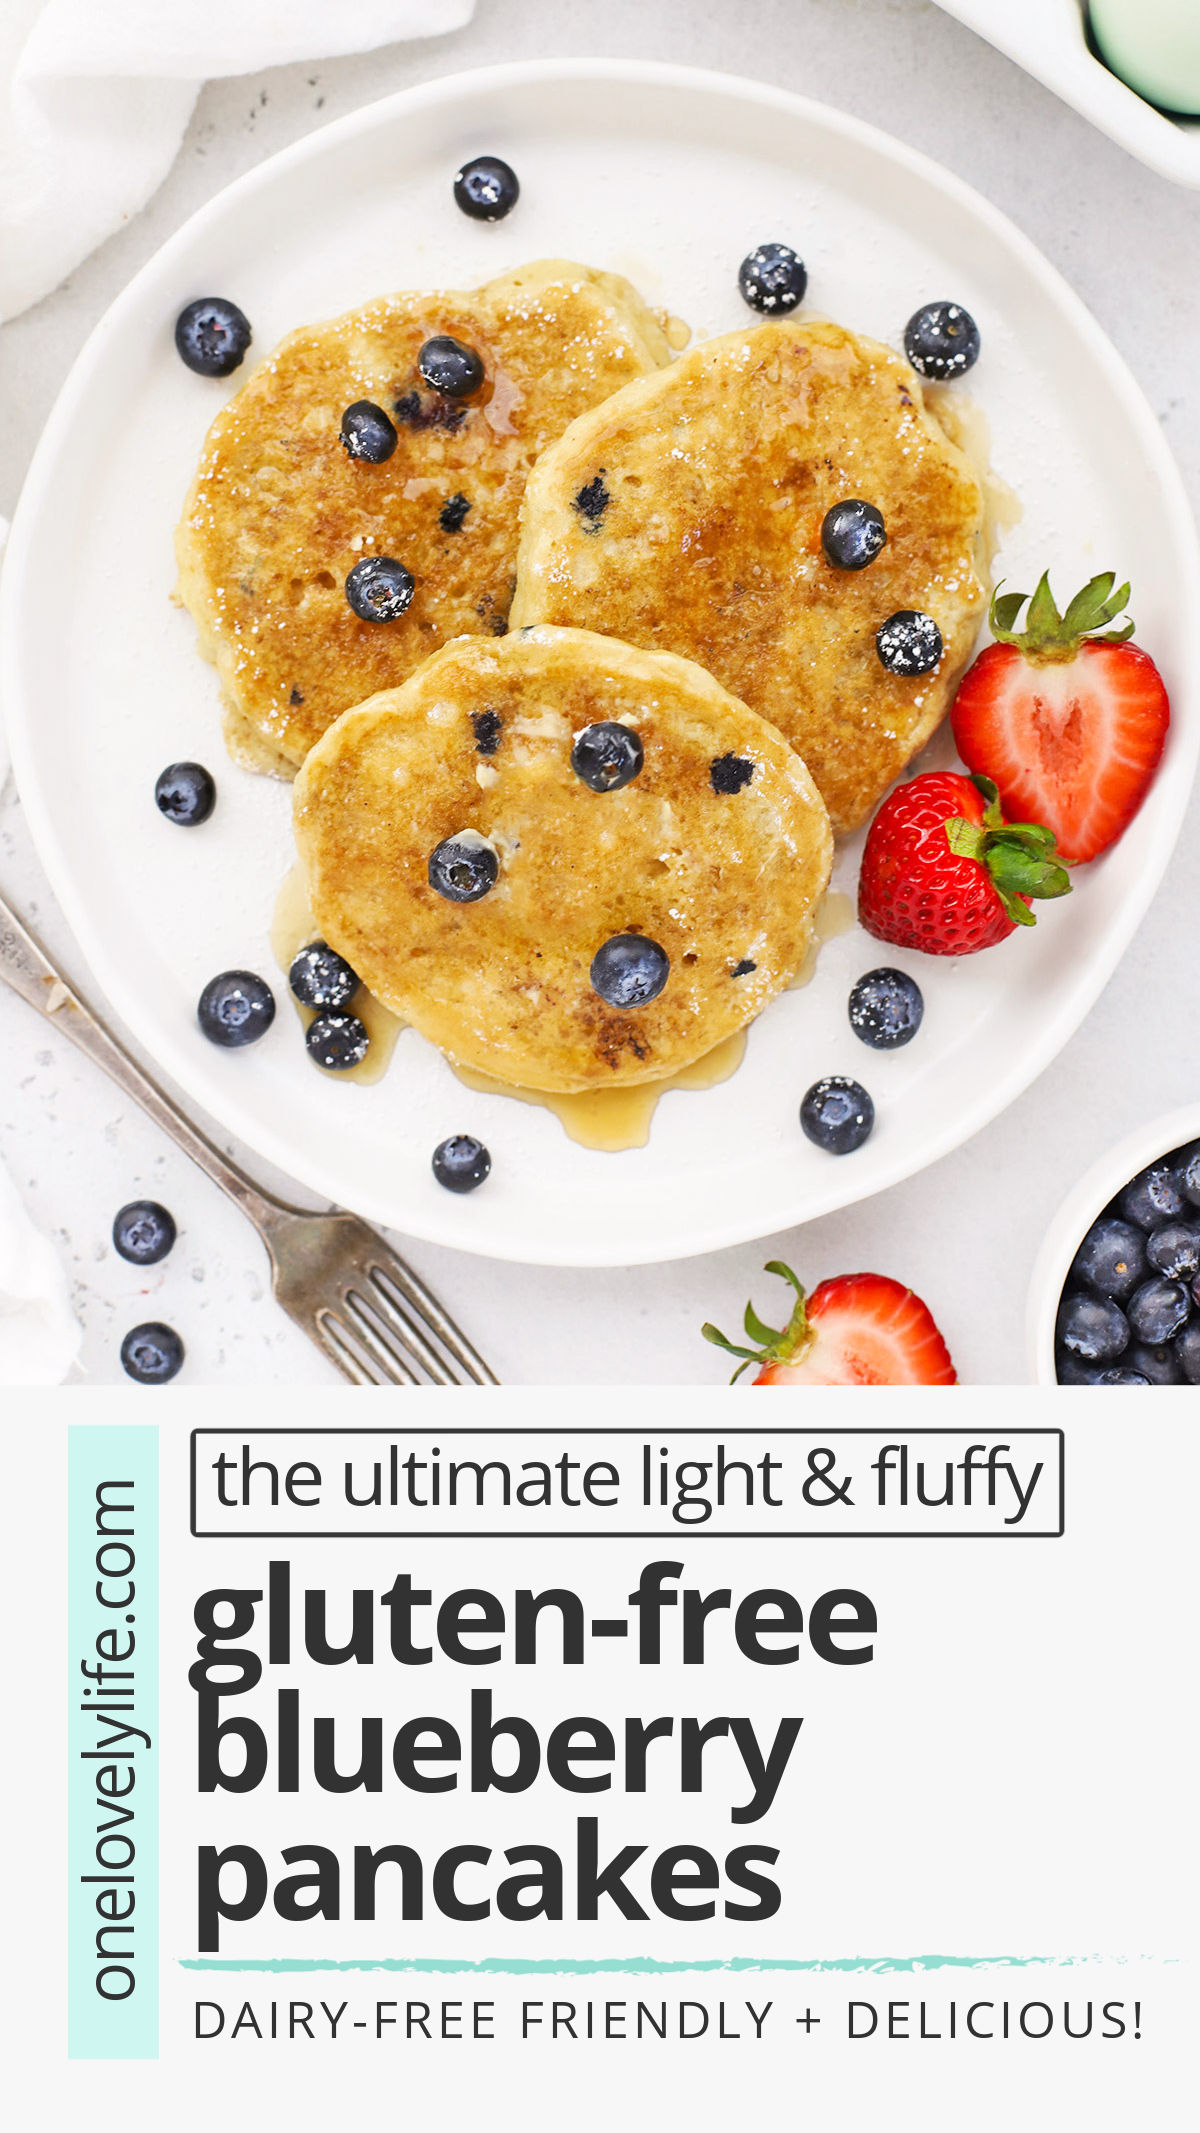 Fluffy Gluten-Free Blueberry Pancakes - These impossibly light, fluffy blueberry buttermilk pancakes are gluten-free, dairy-free & absolutely delicious. // gluten free blueberry pancakes recipe // dairy free blueberry pancakes // the best gluten-free blueberry pancakes // Gluten Free buttermilk blueberry pancakes